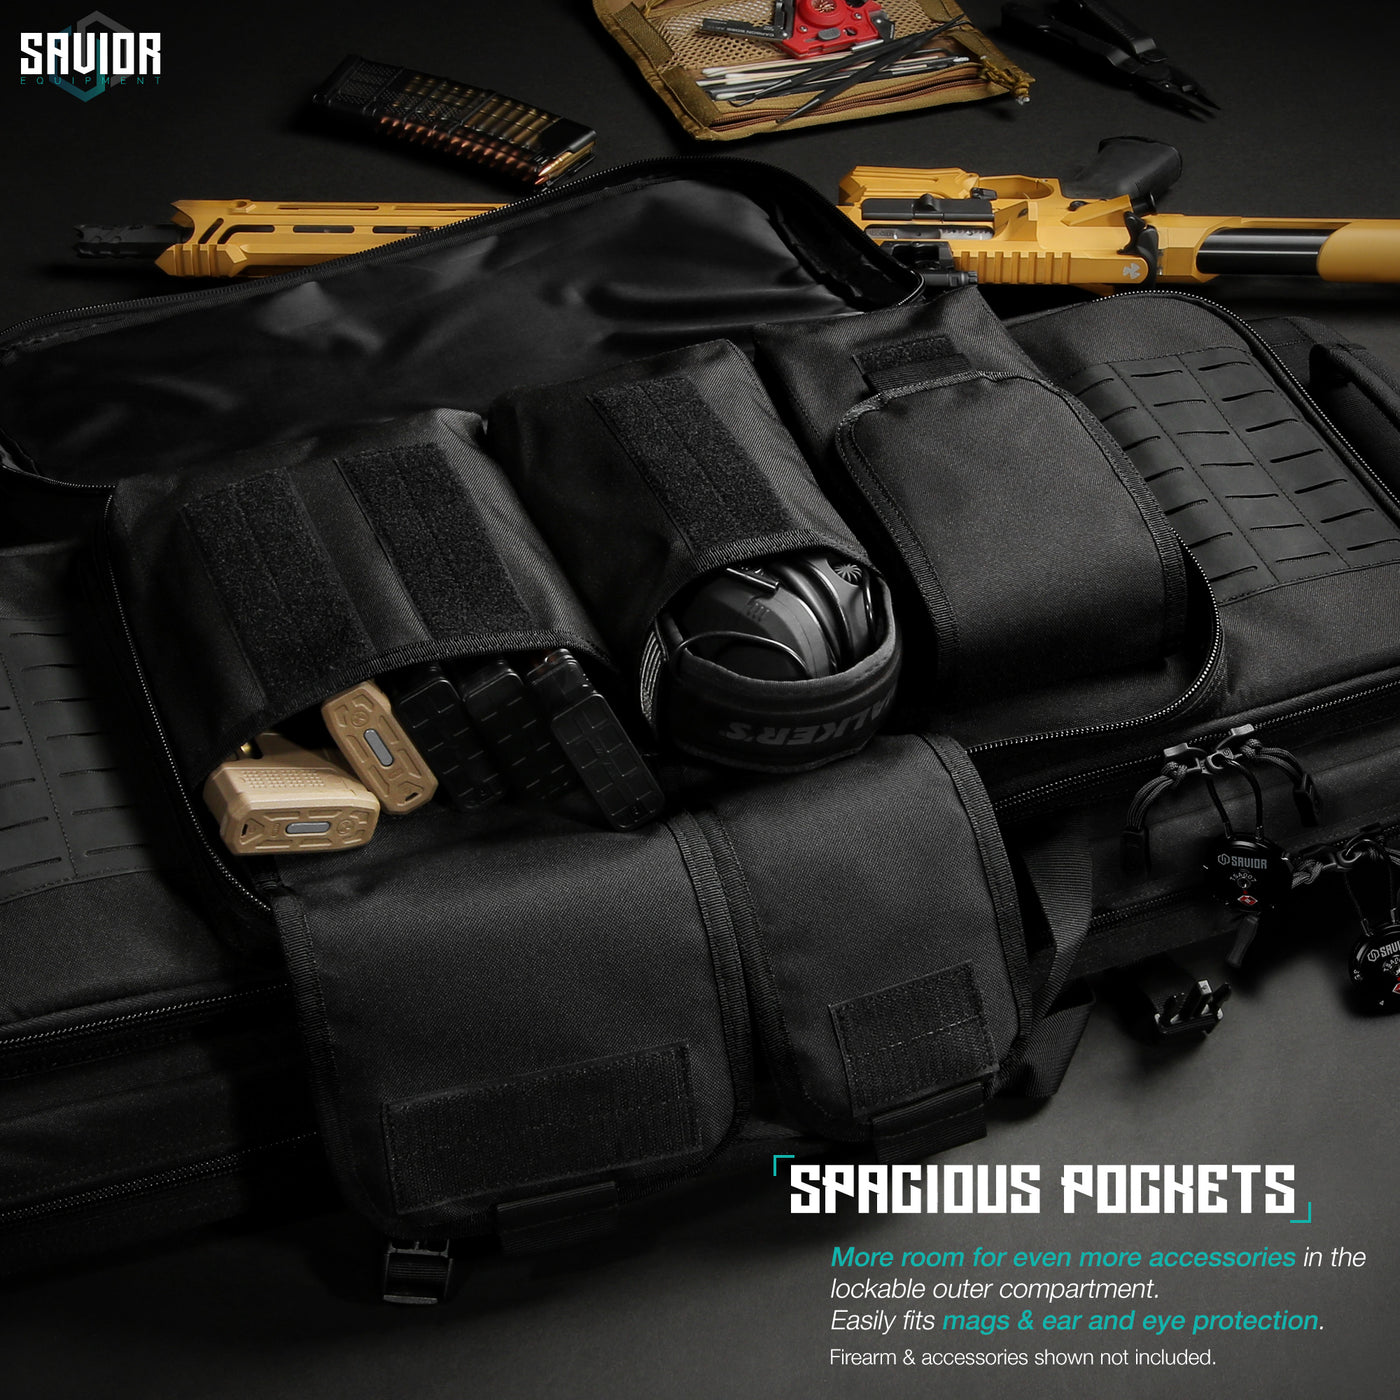 Spacious Pockets - More room for even more accessories in the lockable outer compartment. Easily fits magg, ear & eye protection. Firearms & accessories shown not included.